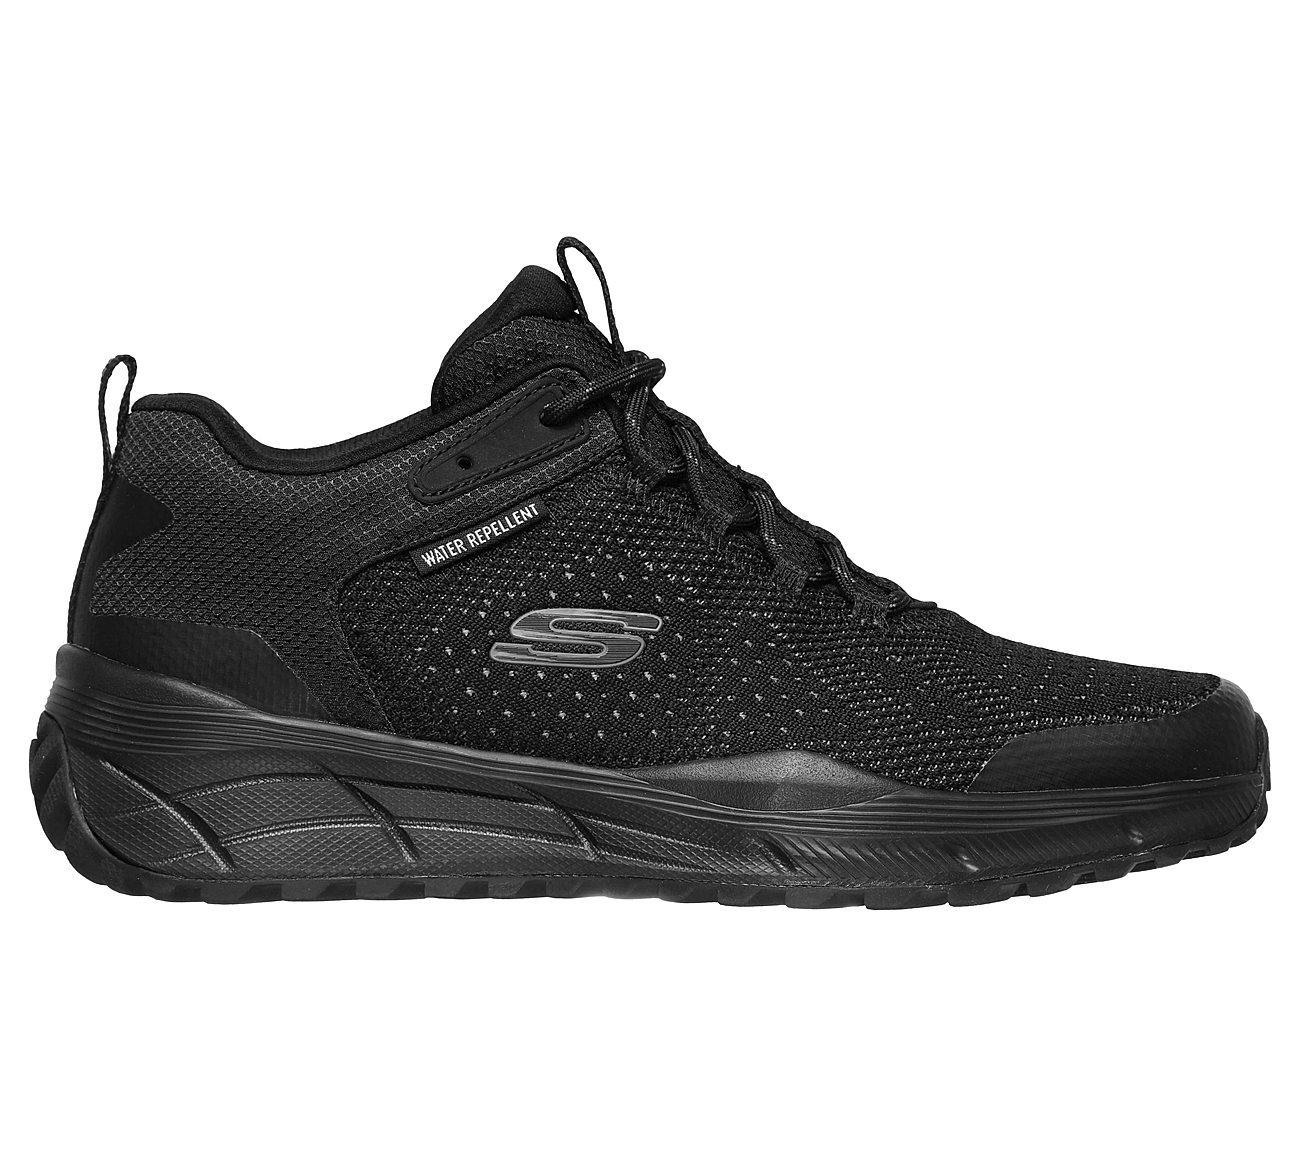 Buy SKECHERS Relaxed Fit: Equalizer 4.0 Trail - Krylos Sport Shoes